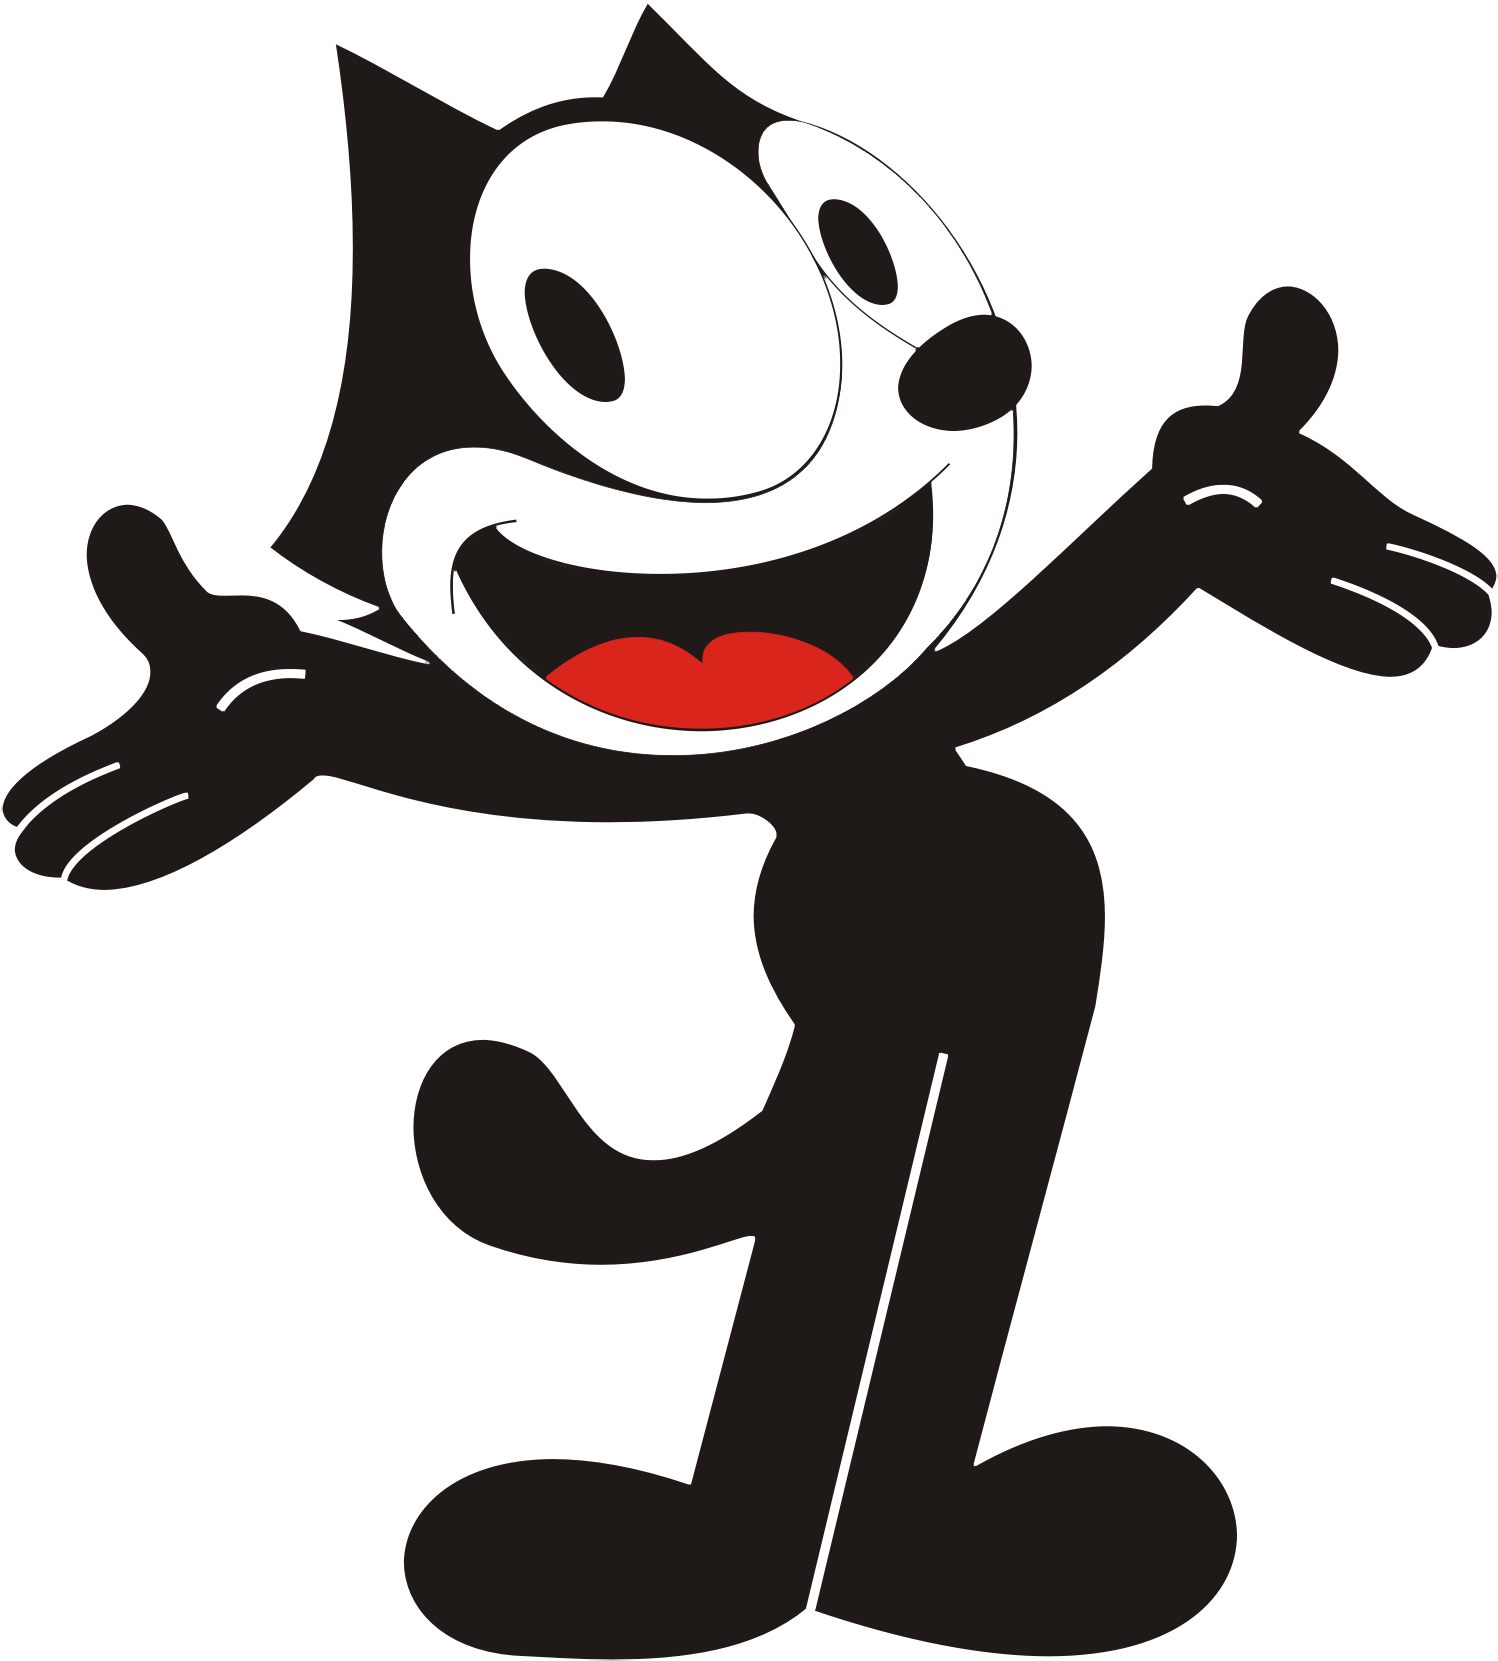 A Cartoon Cat With Arms Spread Out